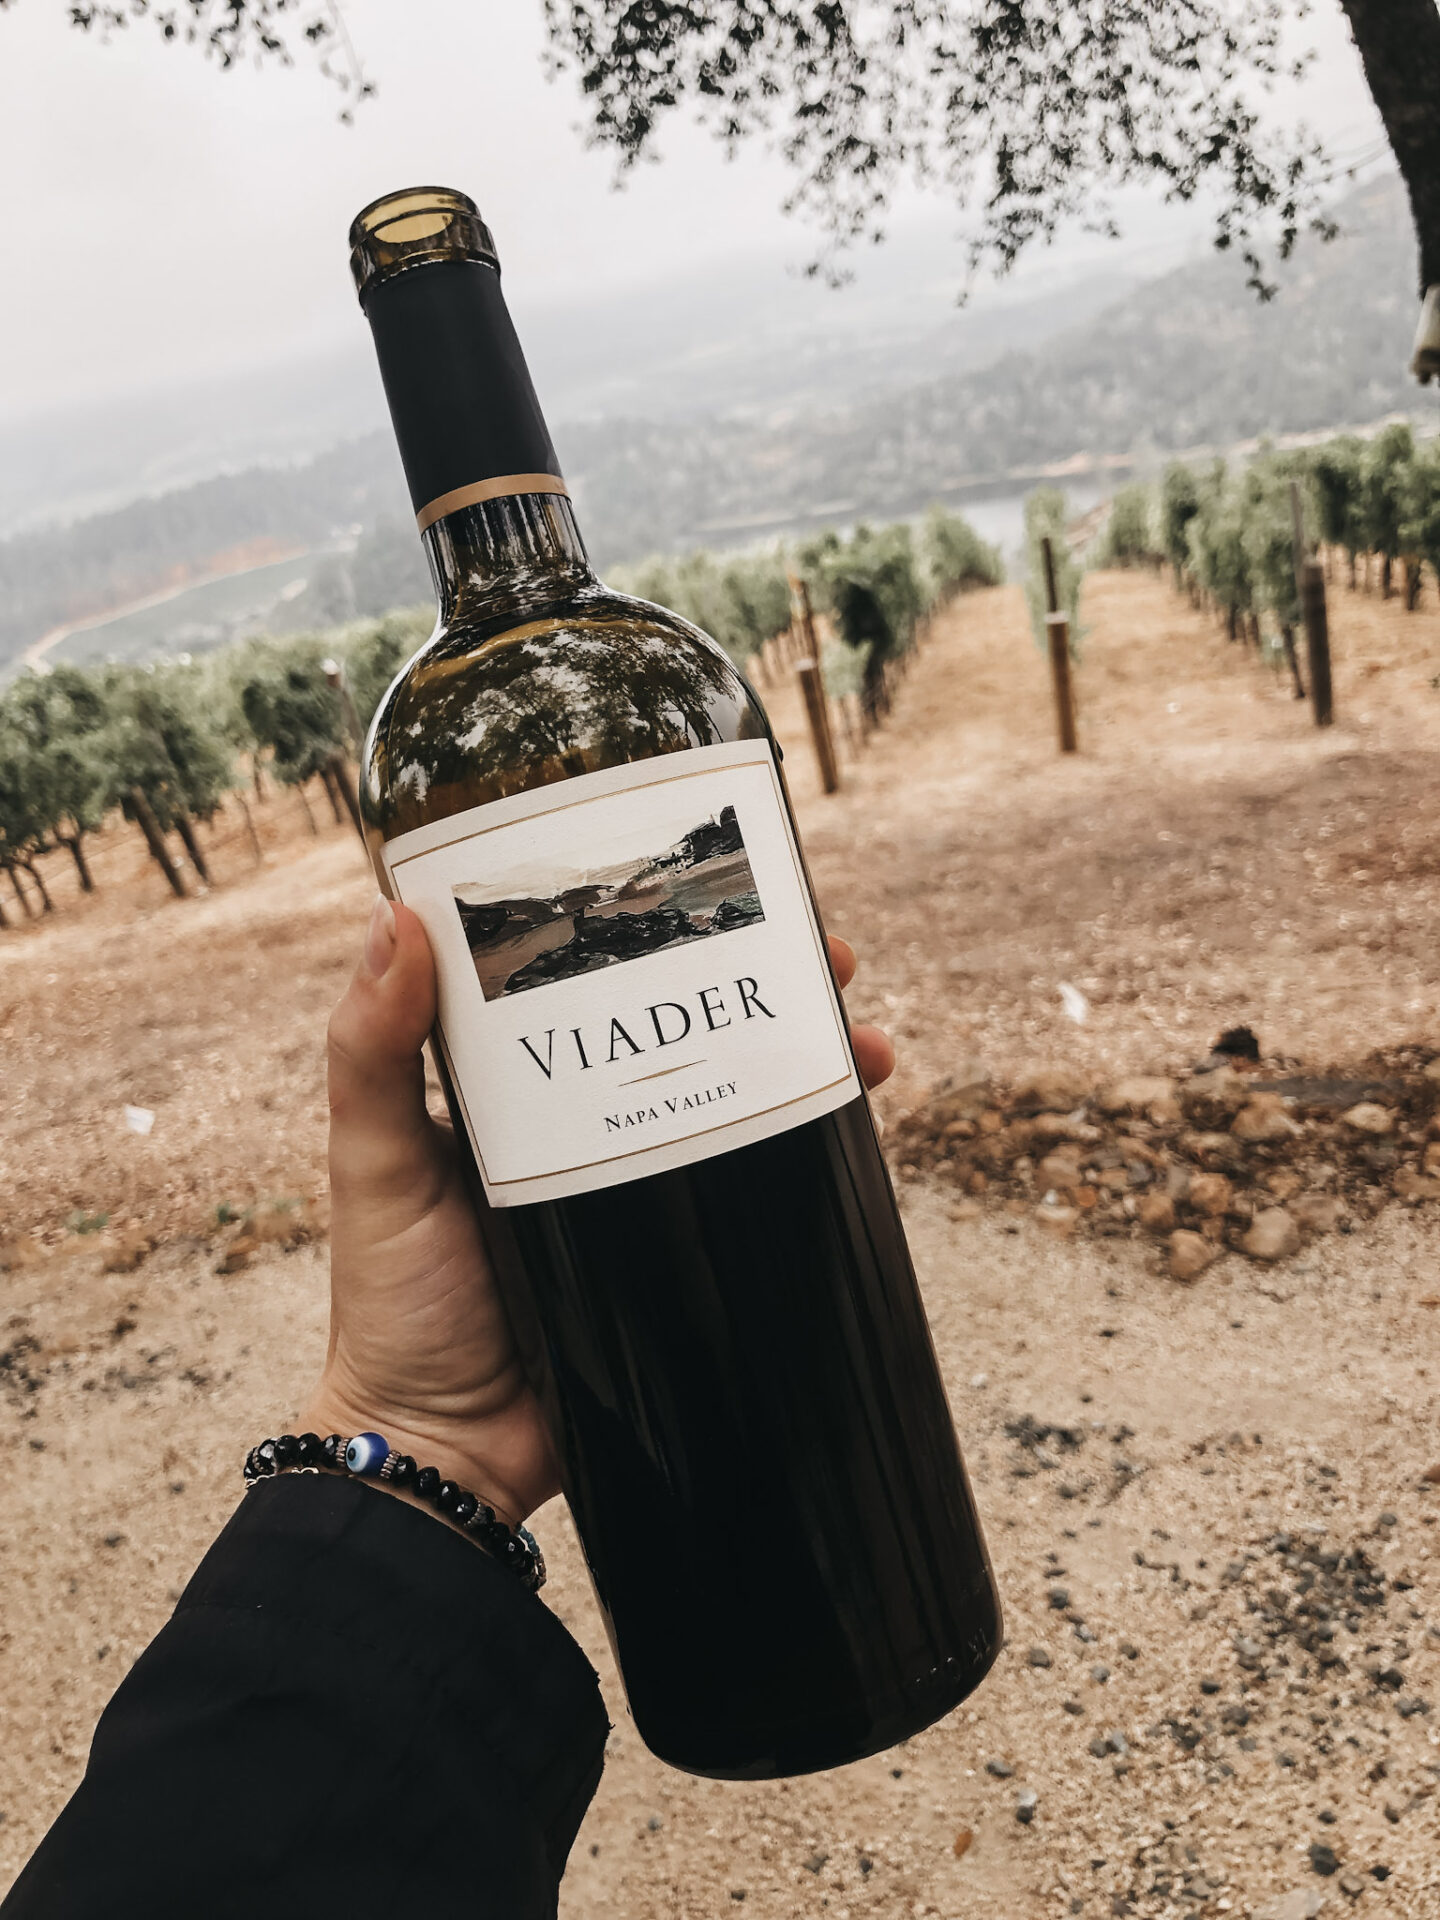 Foggy morning with Viader Howell Mountain Wine